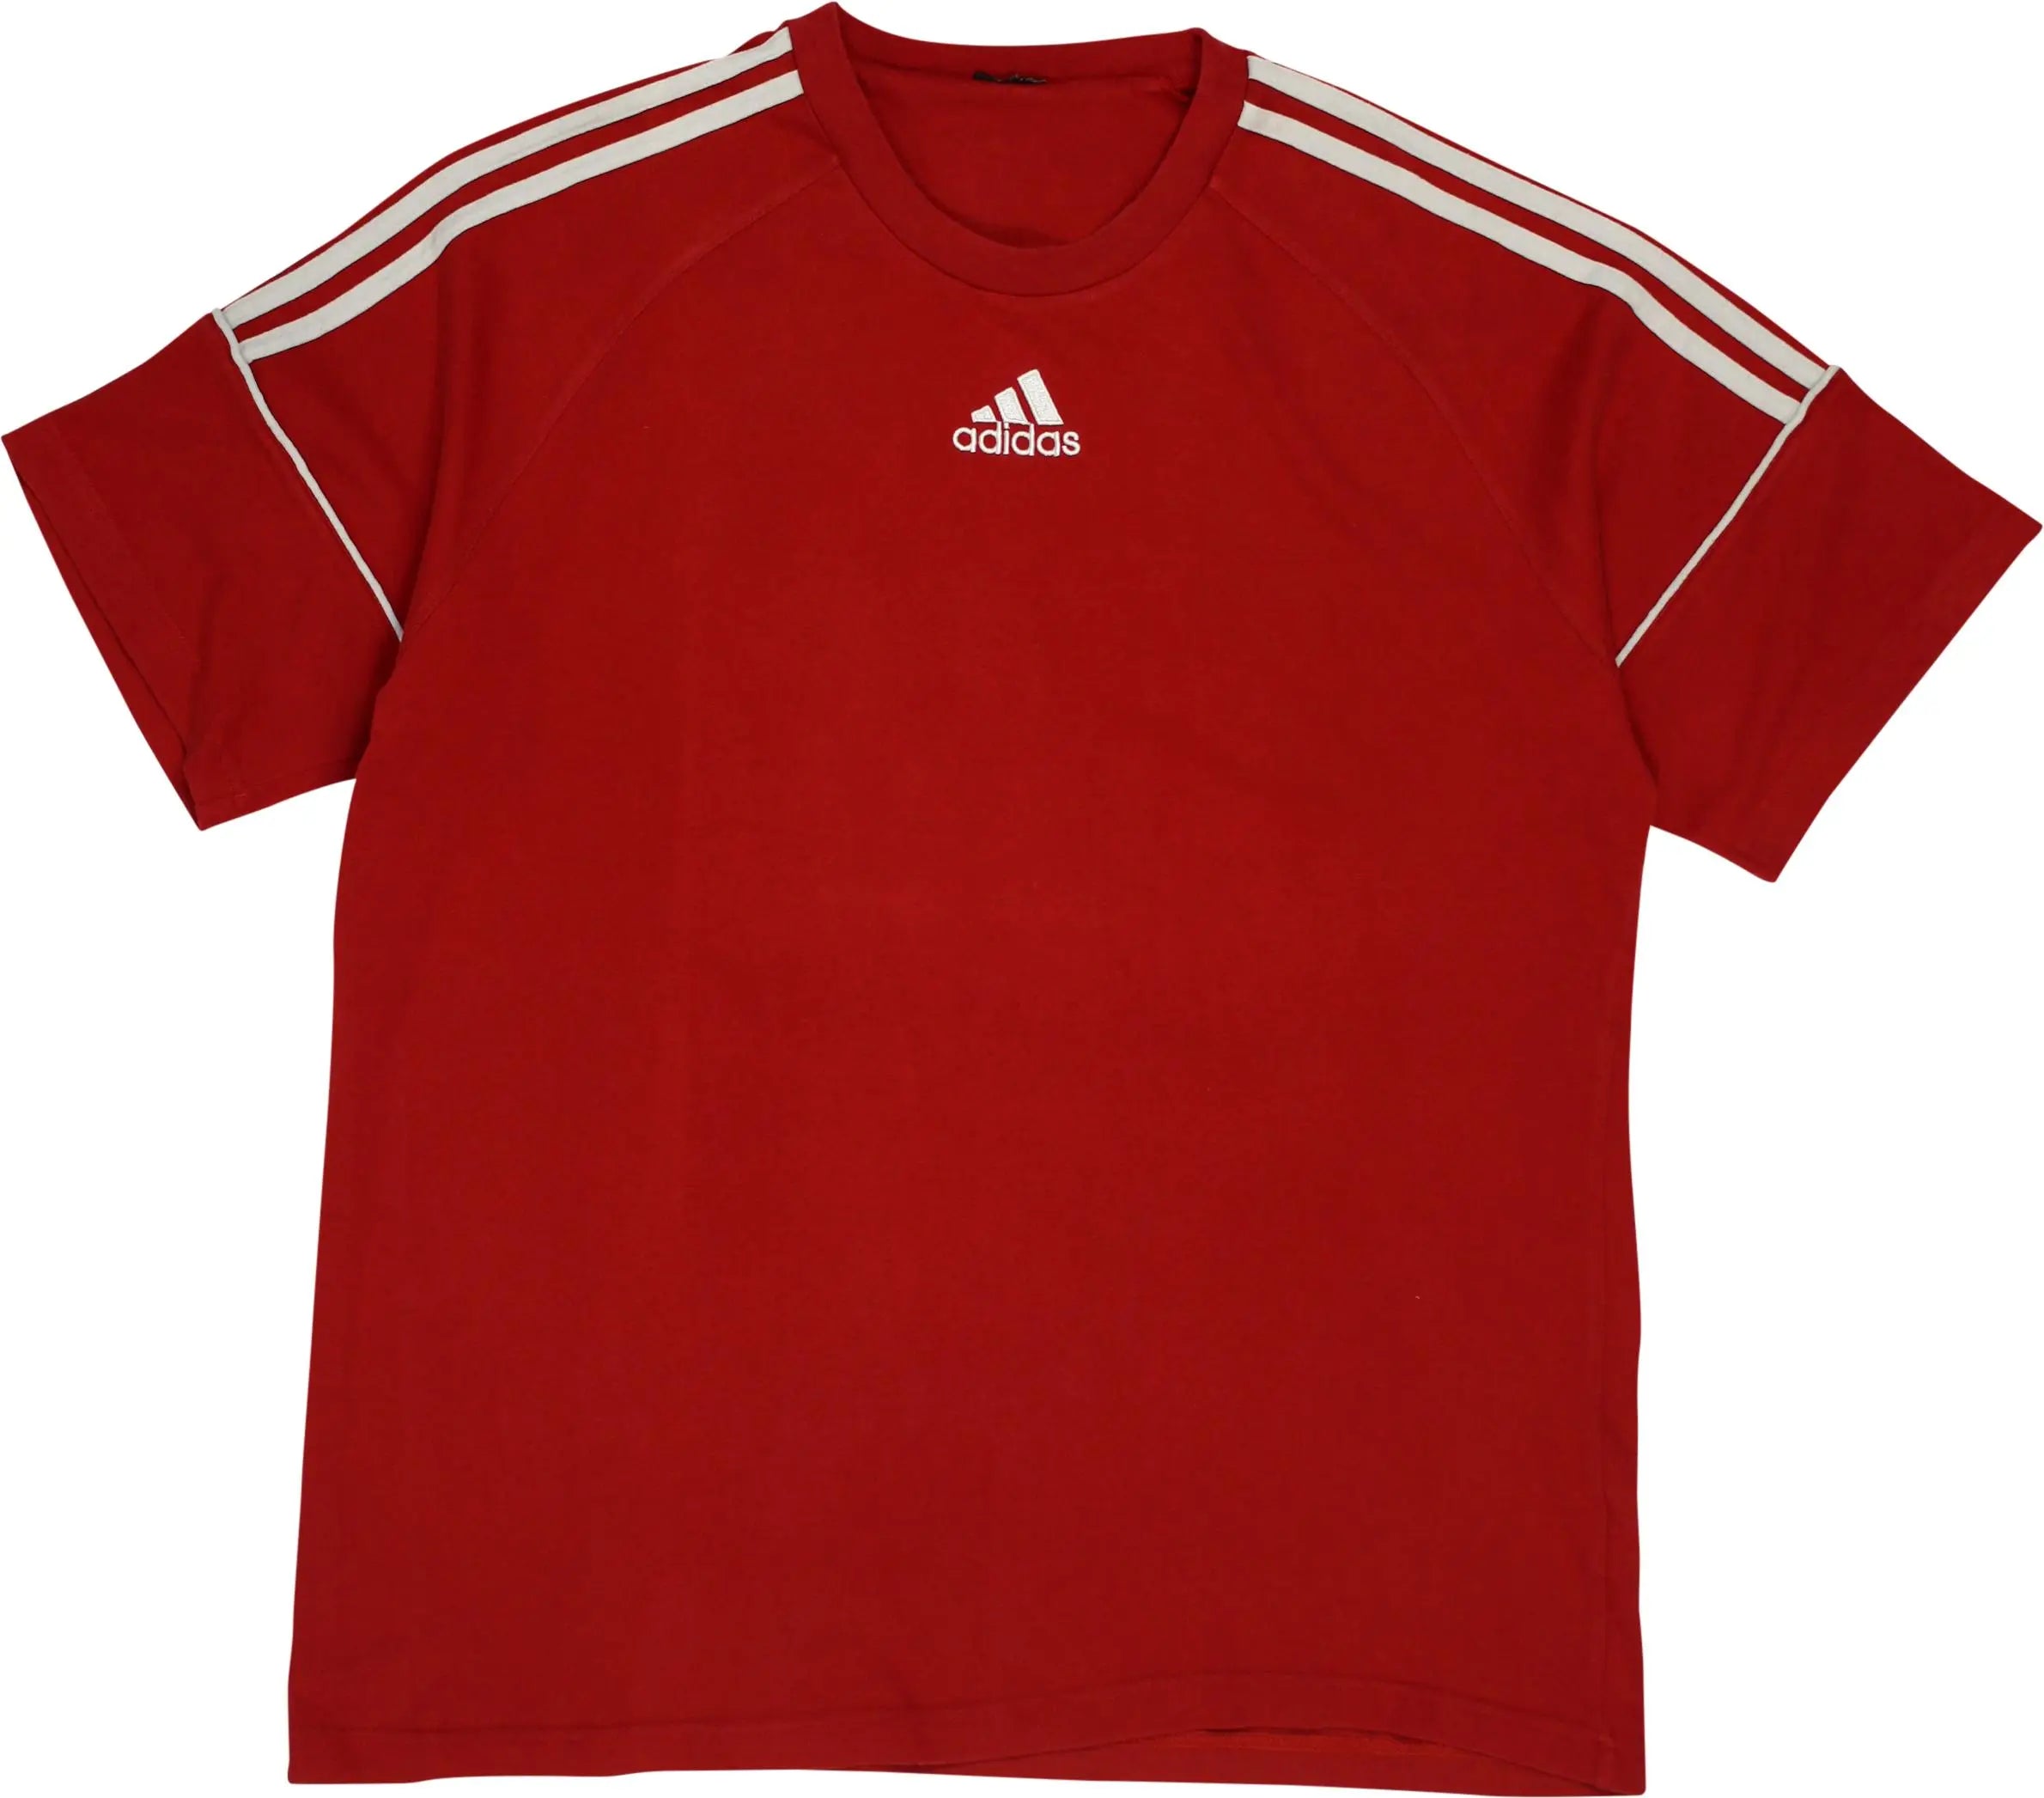 Adidas - T-Shirt by Adidas- ThriftTale.com - Vintage and second handclothing